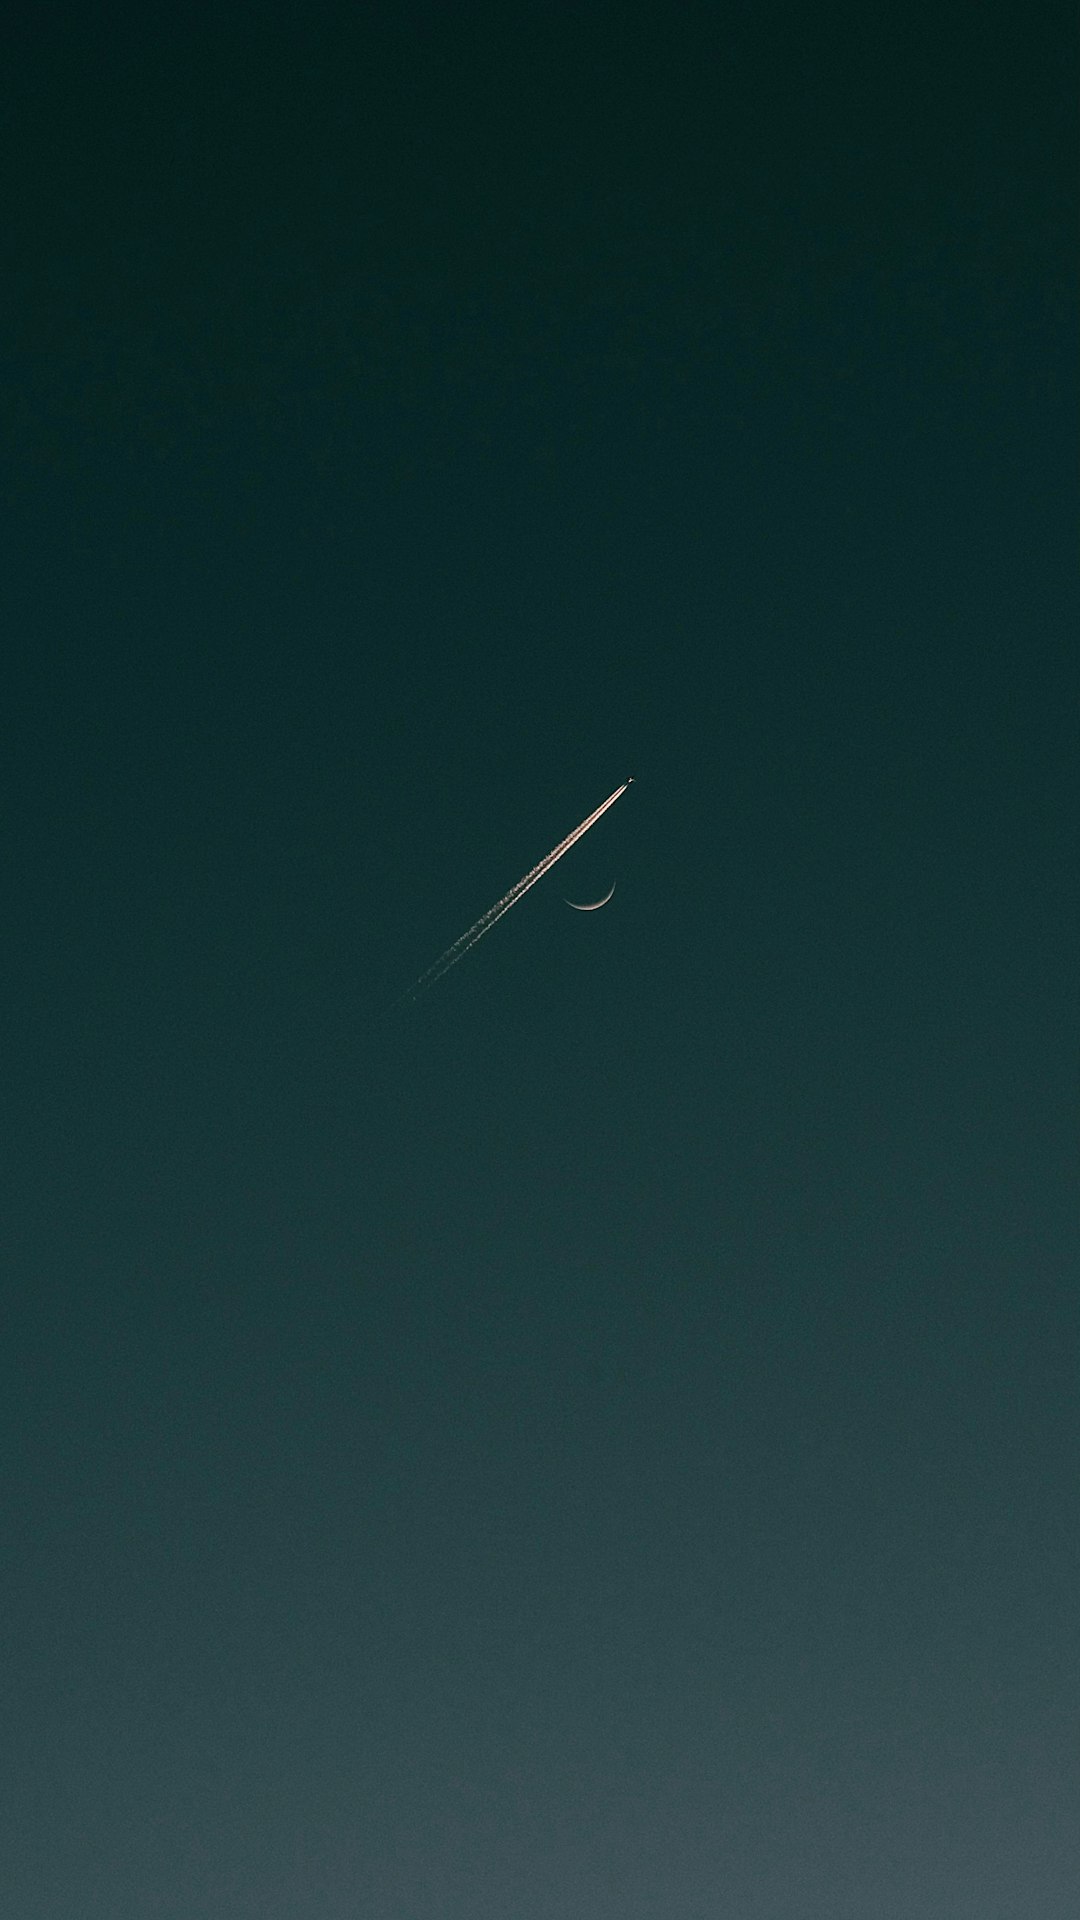 A plane passing by the moon